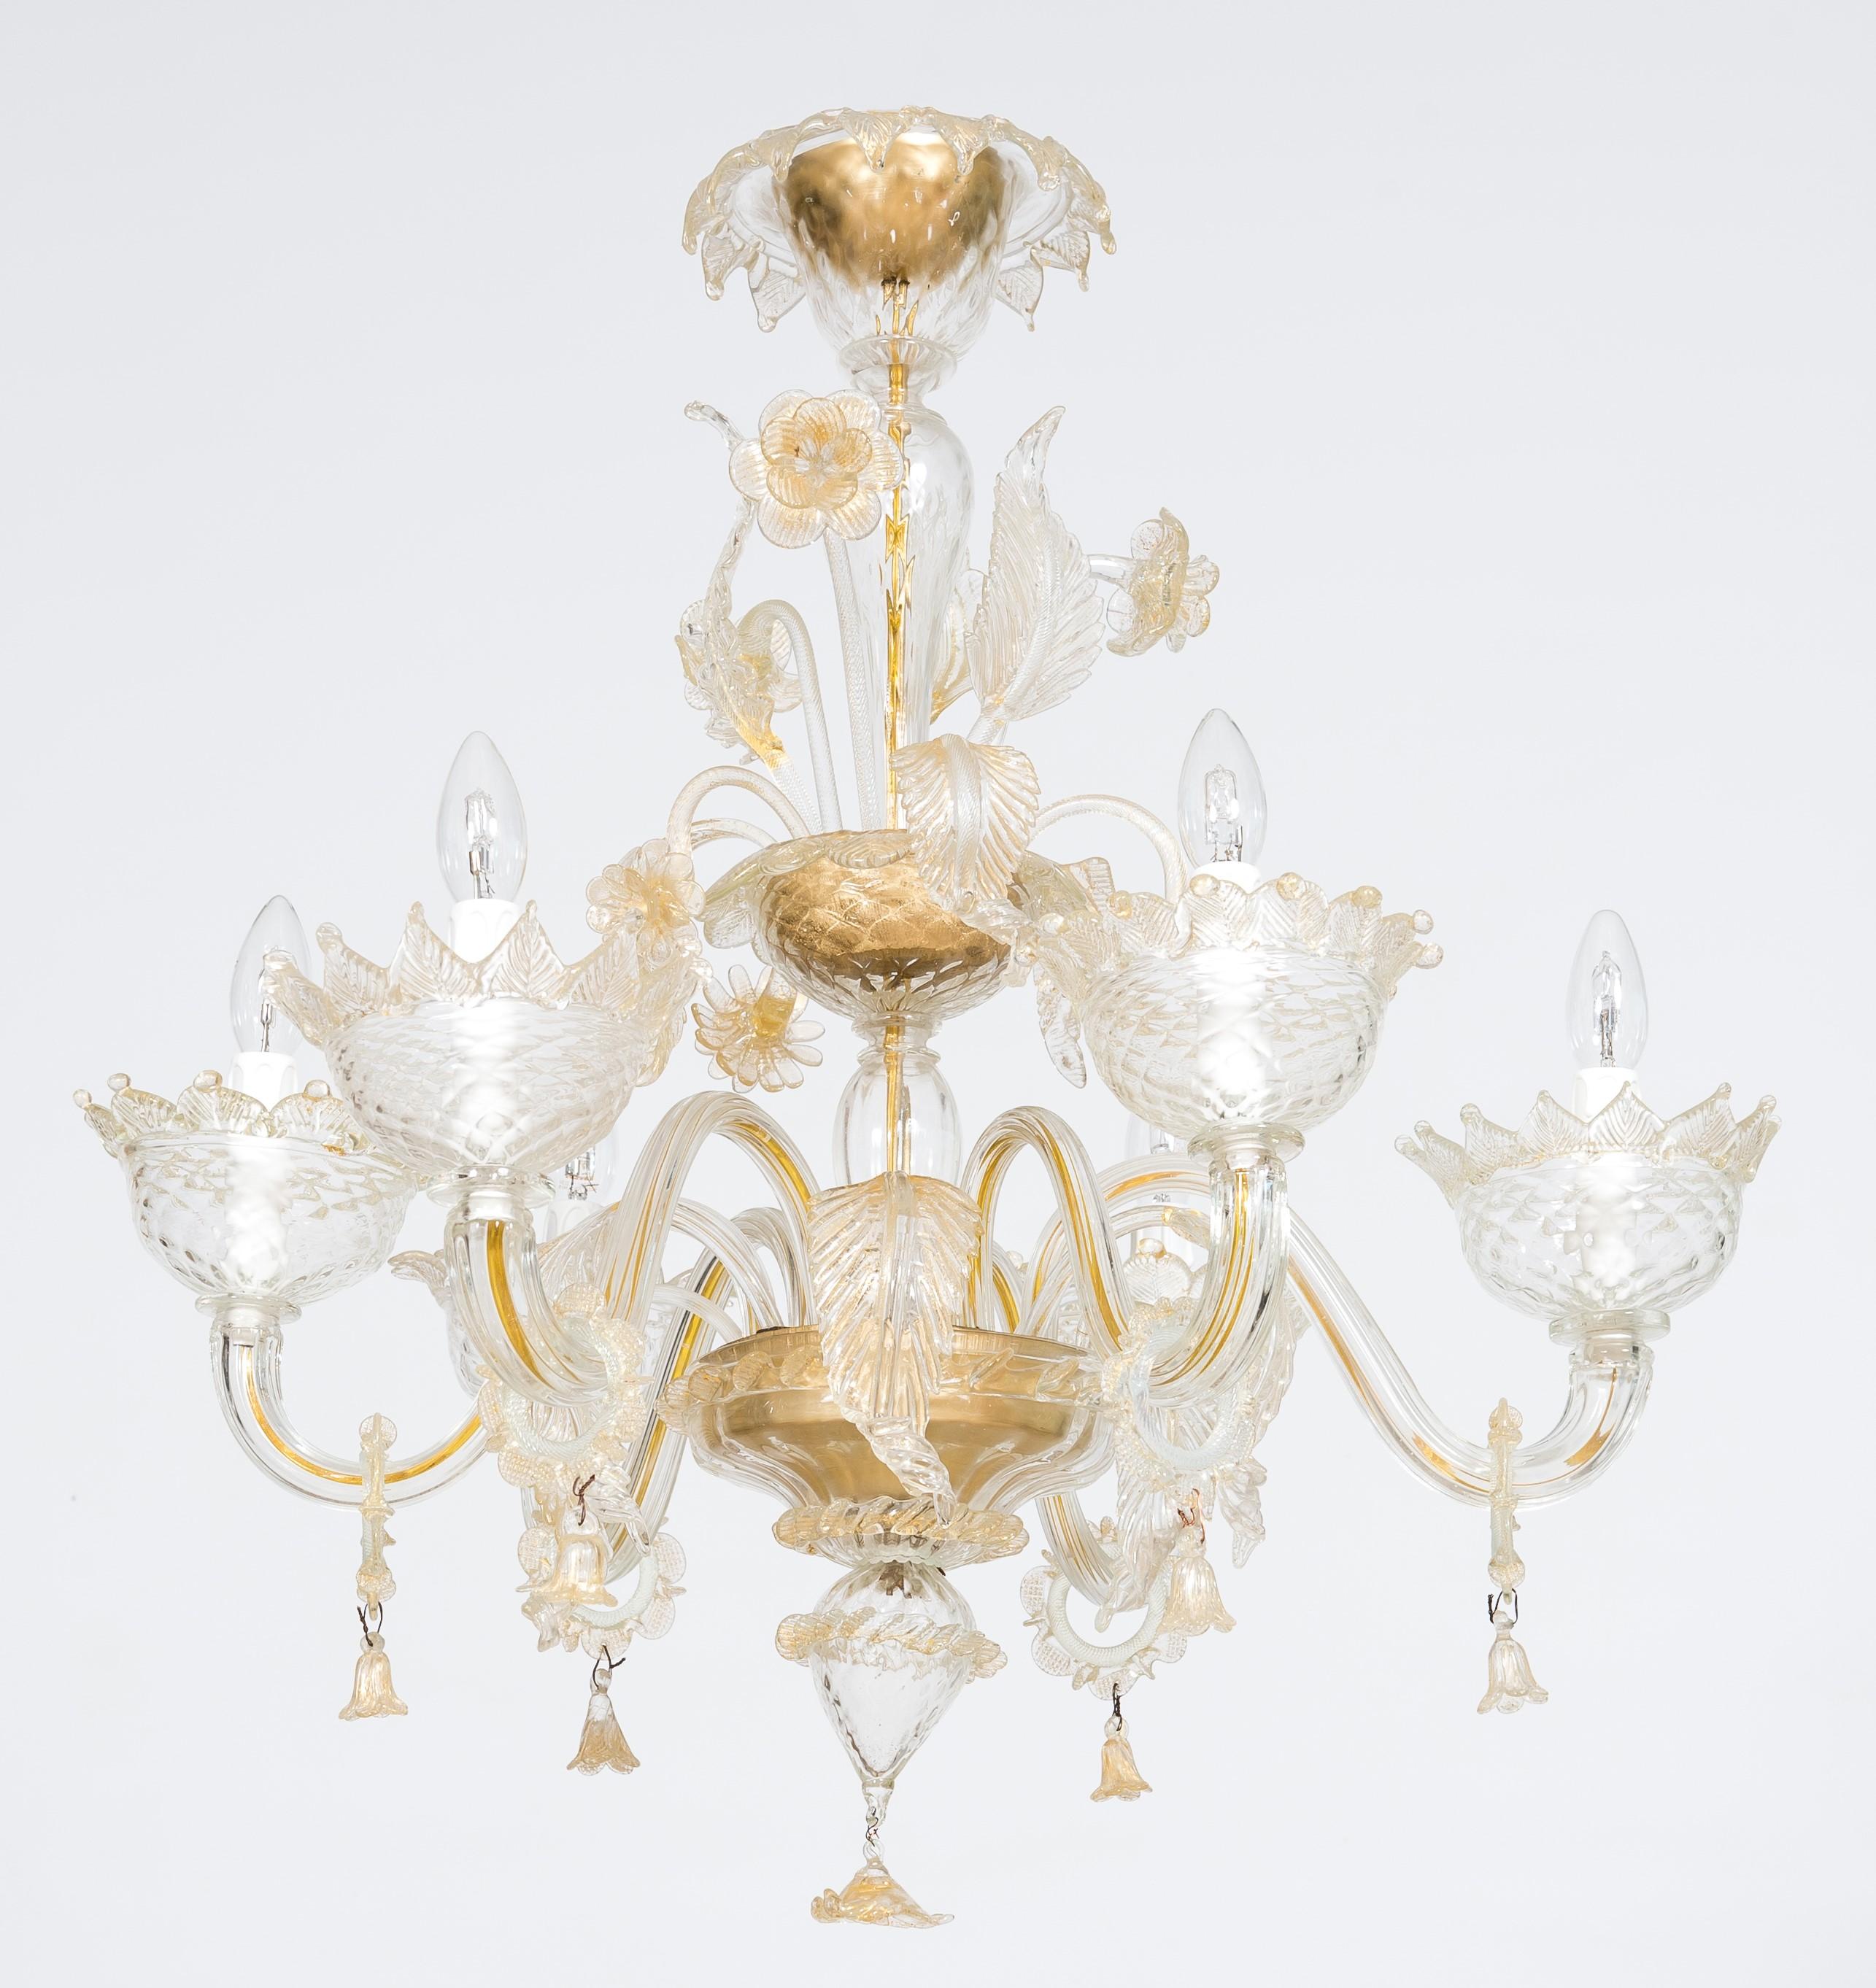 Golden murano glass chandelier with “Vere” decorations, 20th century, Italy.
This extraordinary chandelier was entirely made in the island of Murano, Italy, following the ancient glassmaking techniques. This masterpiece is rich in details and it is